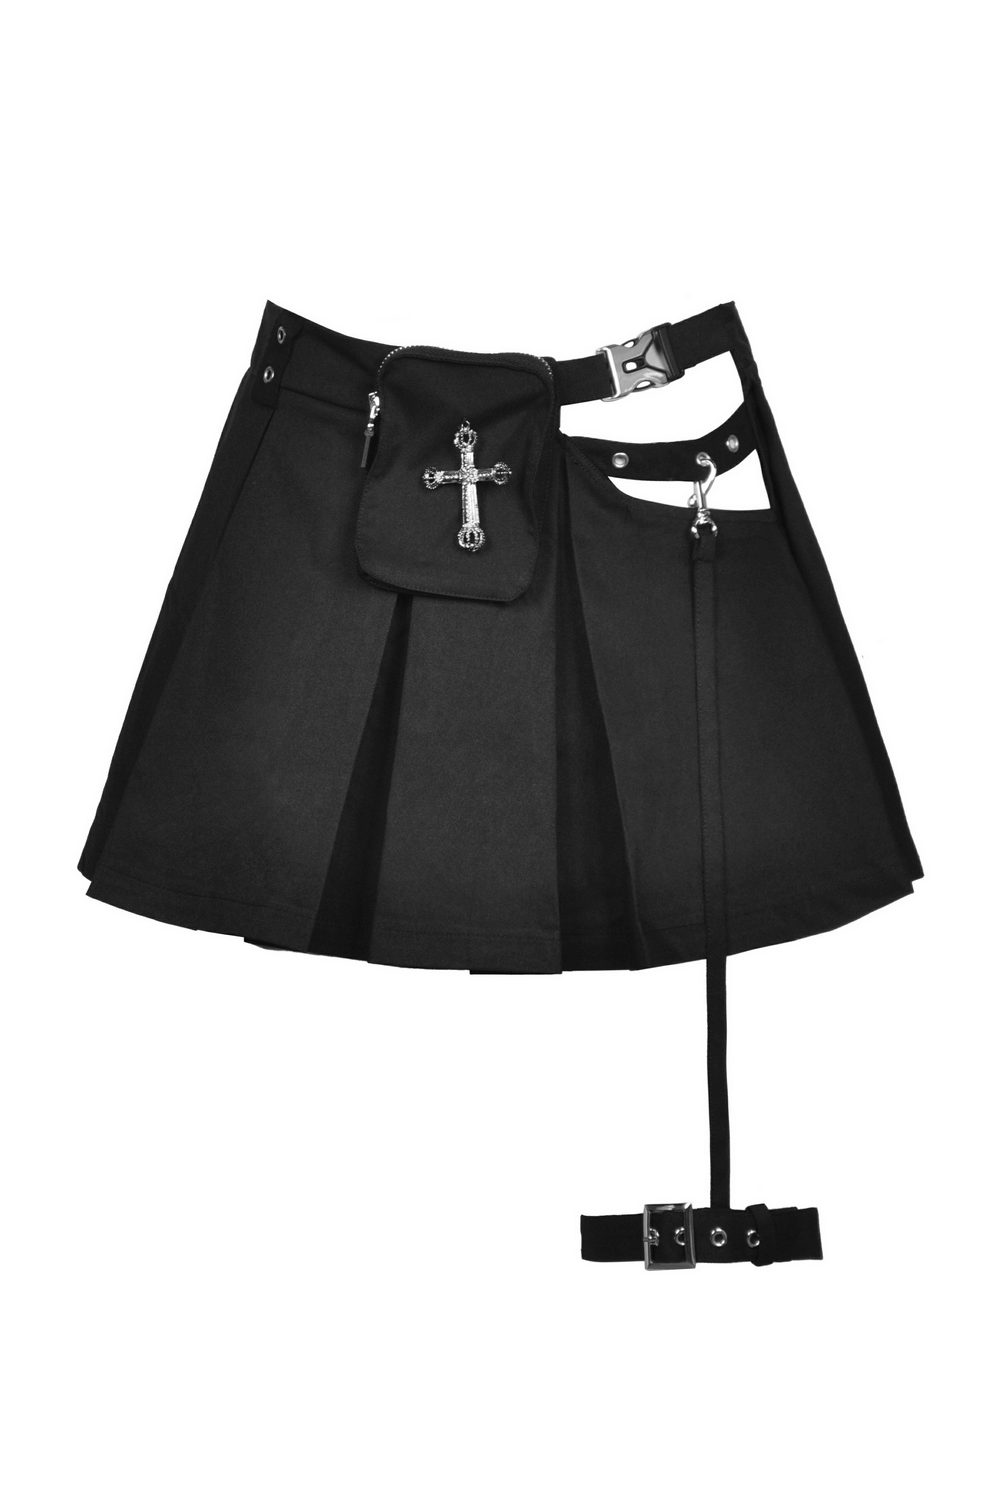 Women's Gothic Pleated Mini Skirt with Cross-Detailing